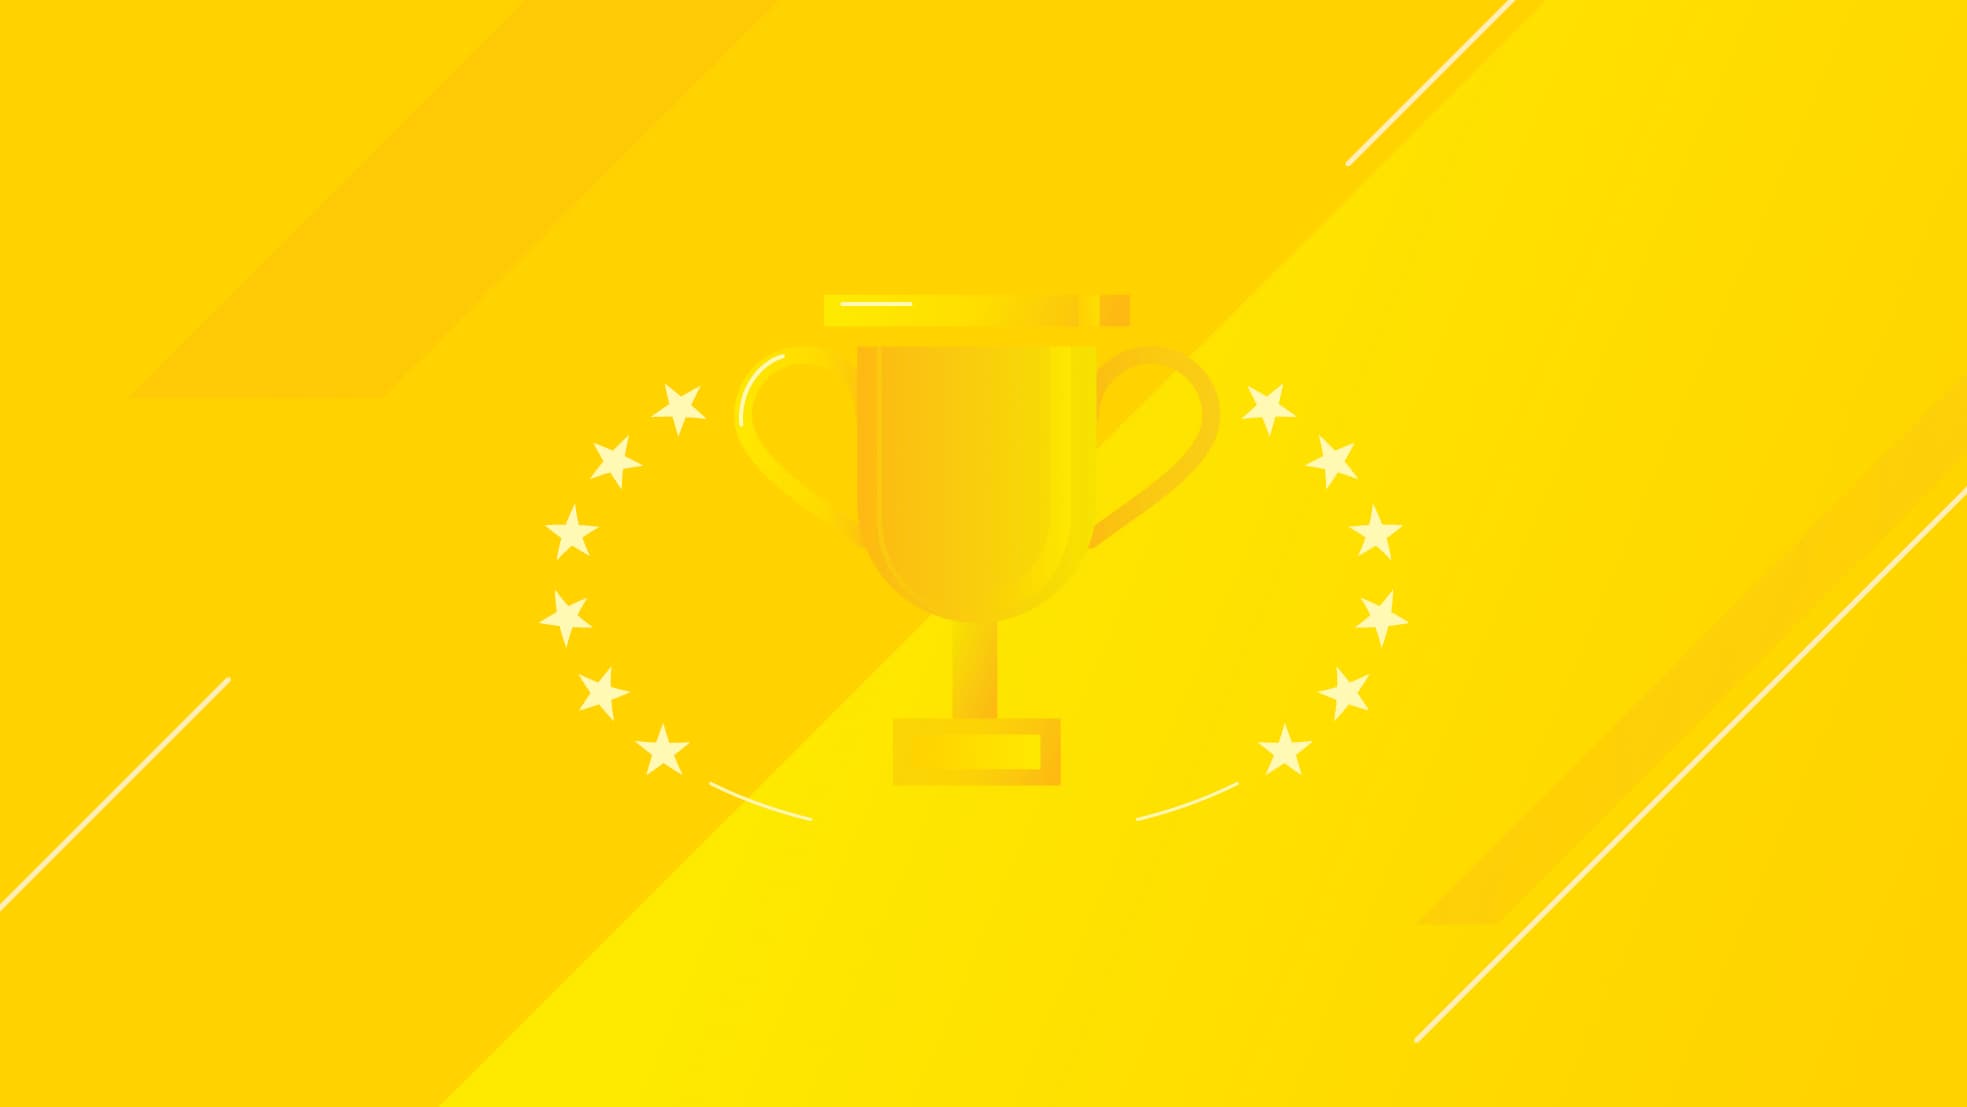 Illustration of trophy on yellow background